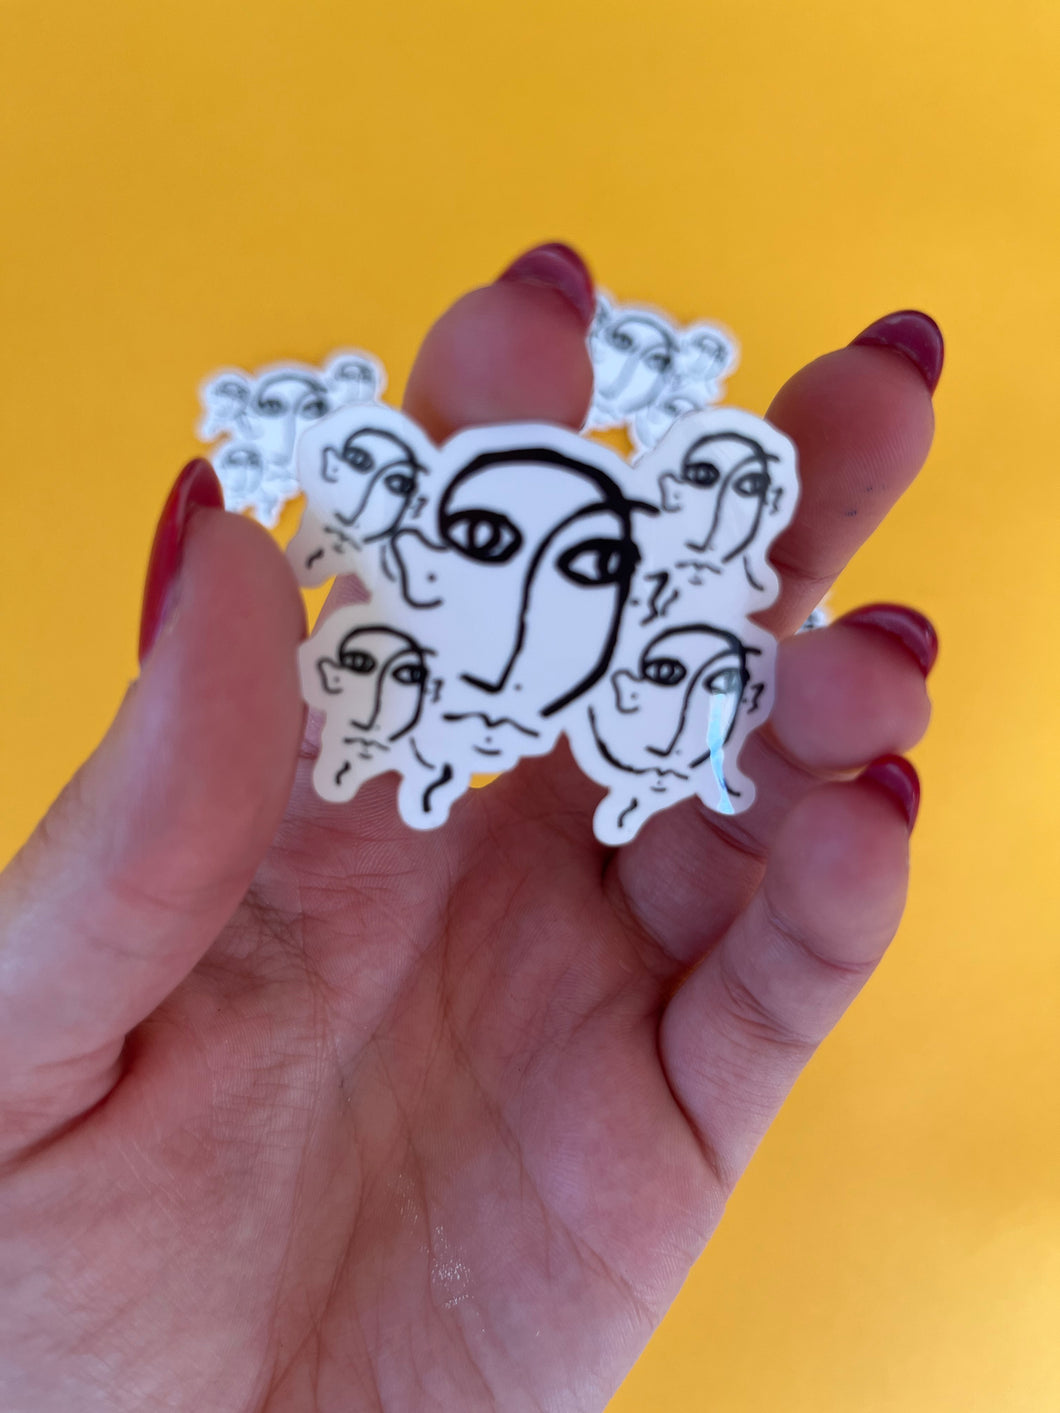 Faces on Faces Sticker